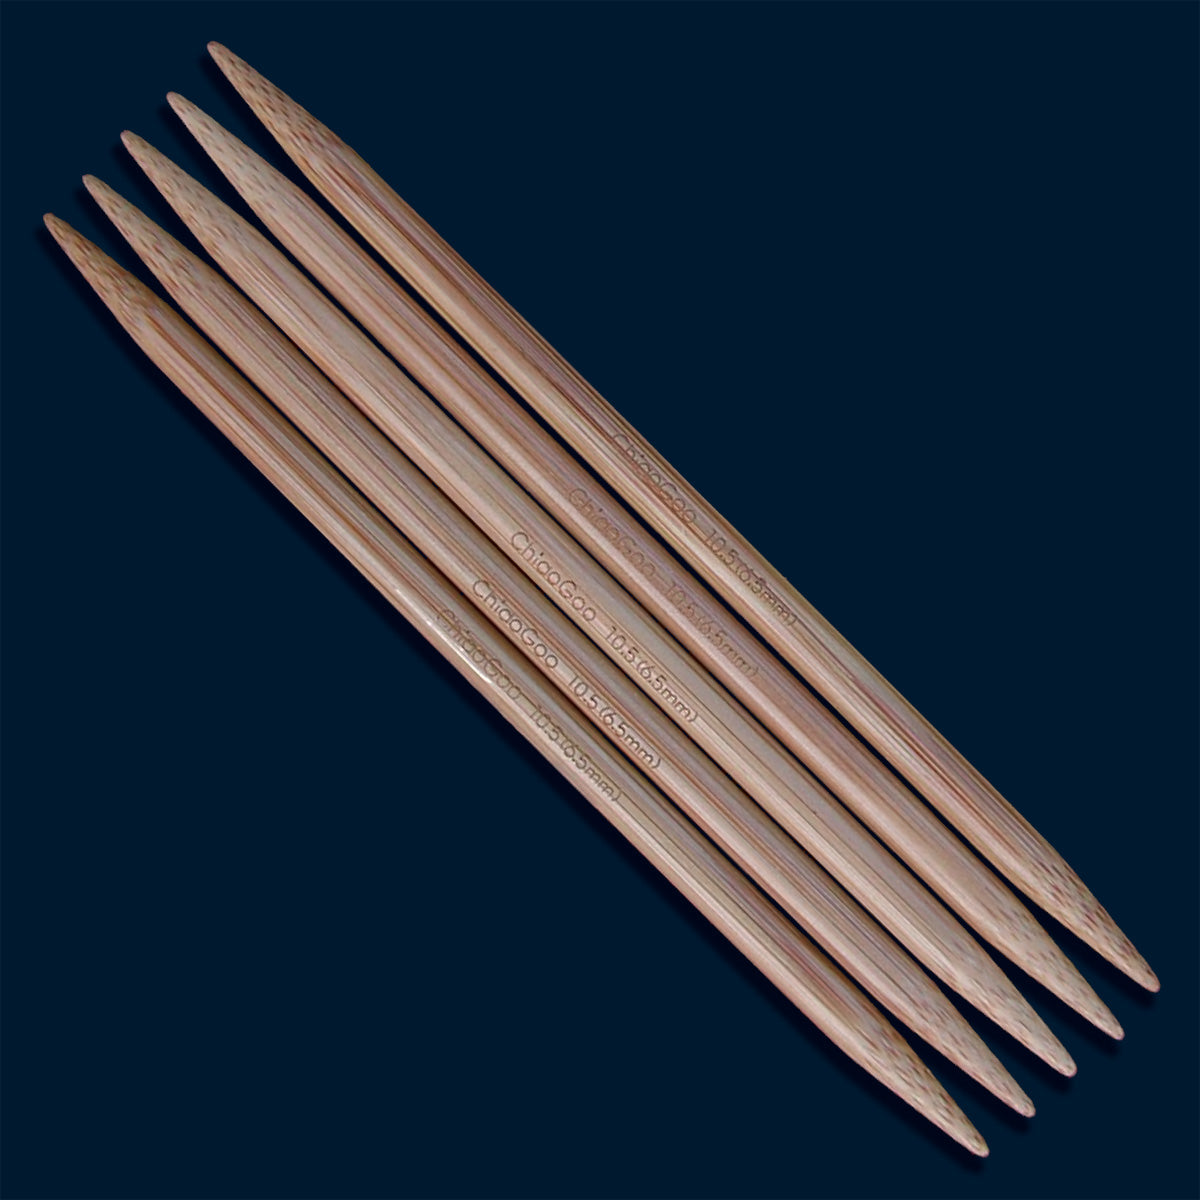 7 Bamboo Double-Pointed Knitting Needle 5-pack - Size 15